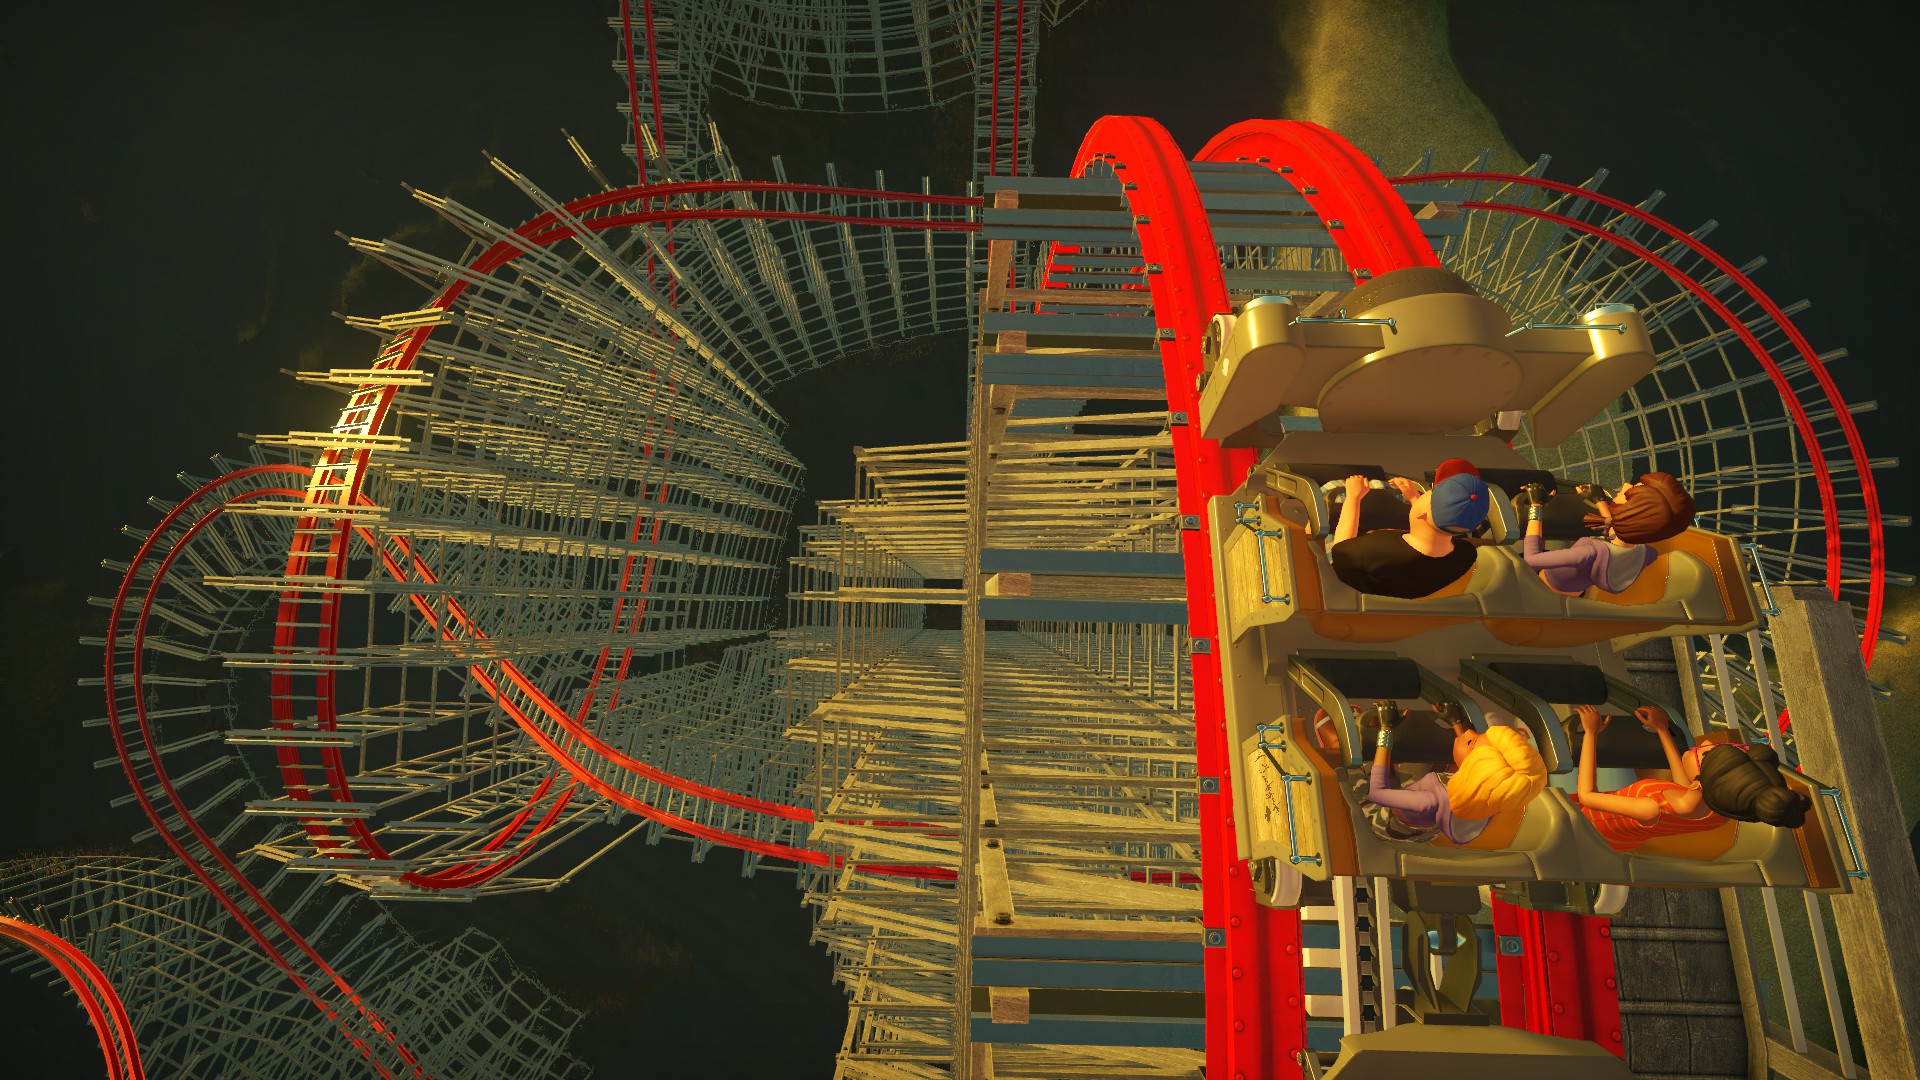 RollerCoaster Tycoon 2: Time Twister Review - GameSpot